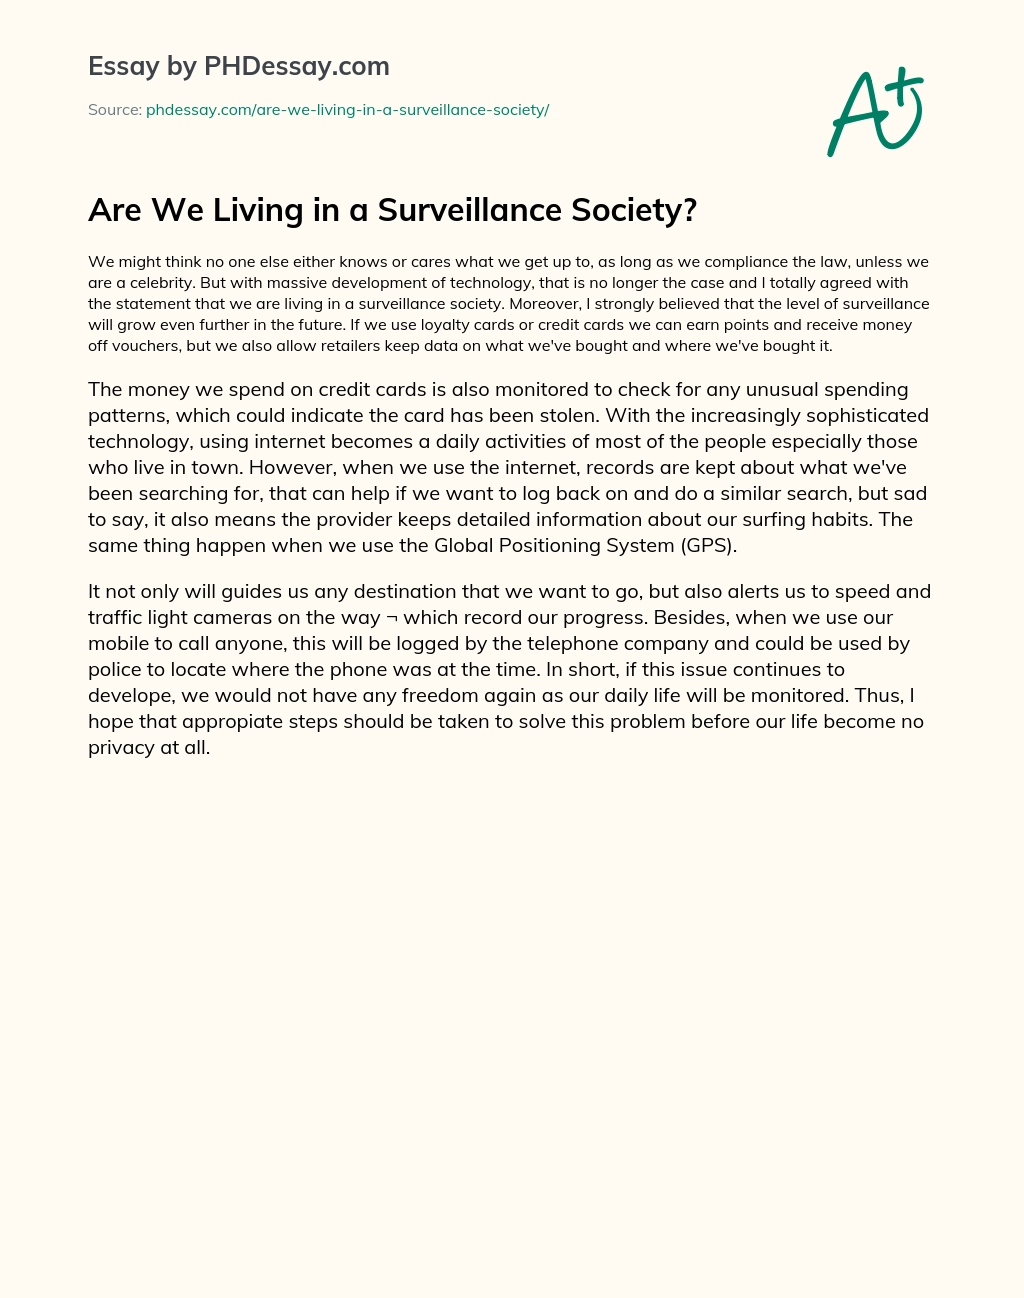 Are We Living in a Surveillance Society? essay